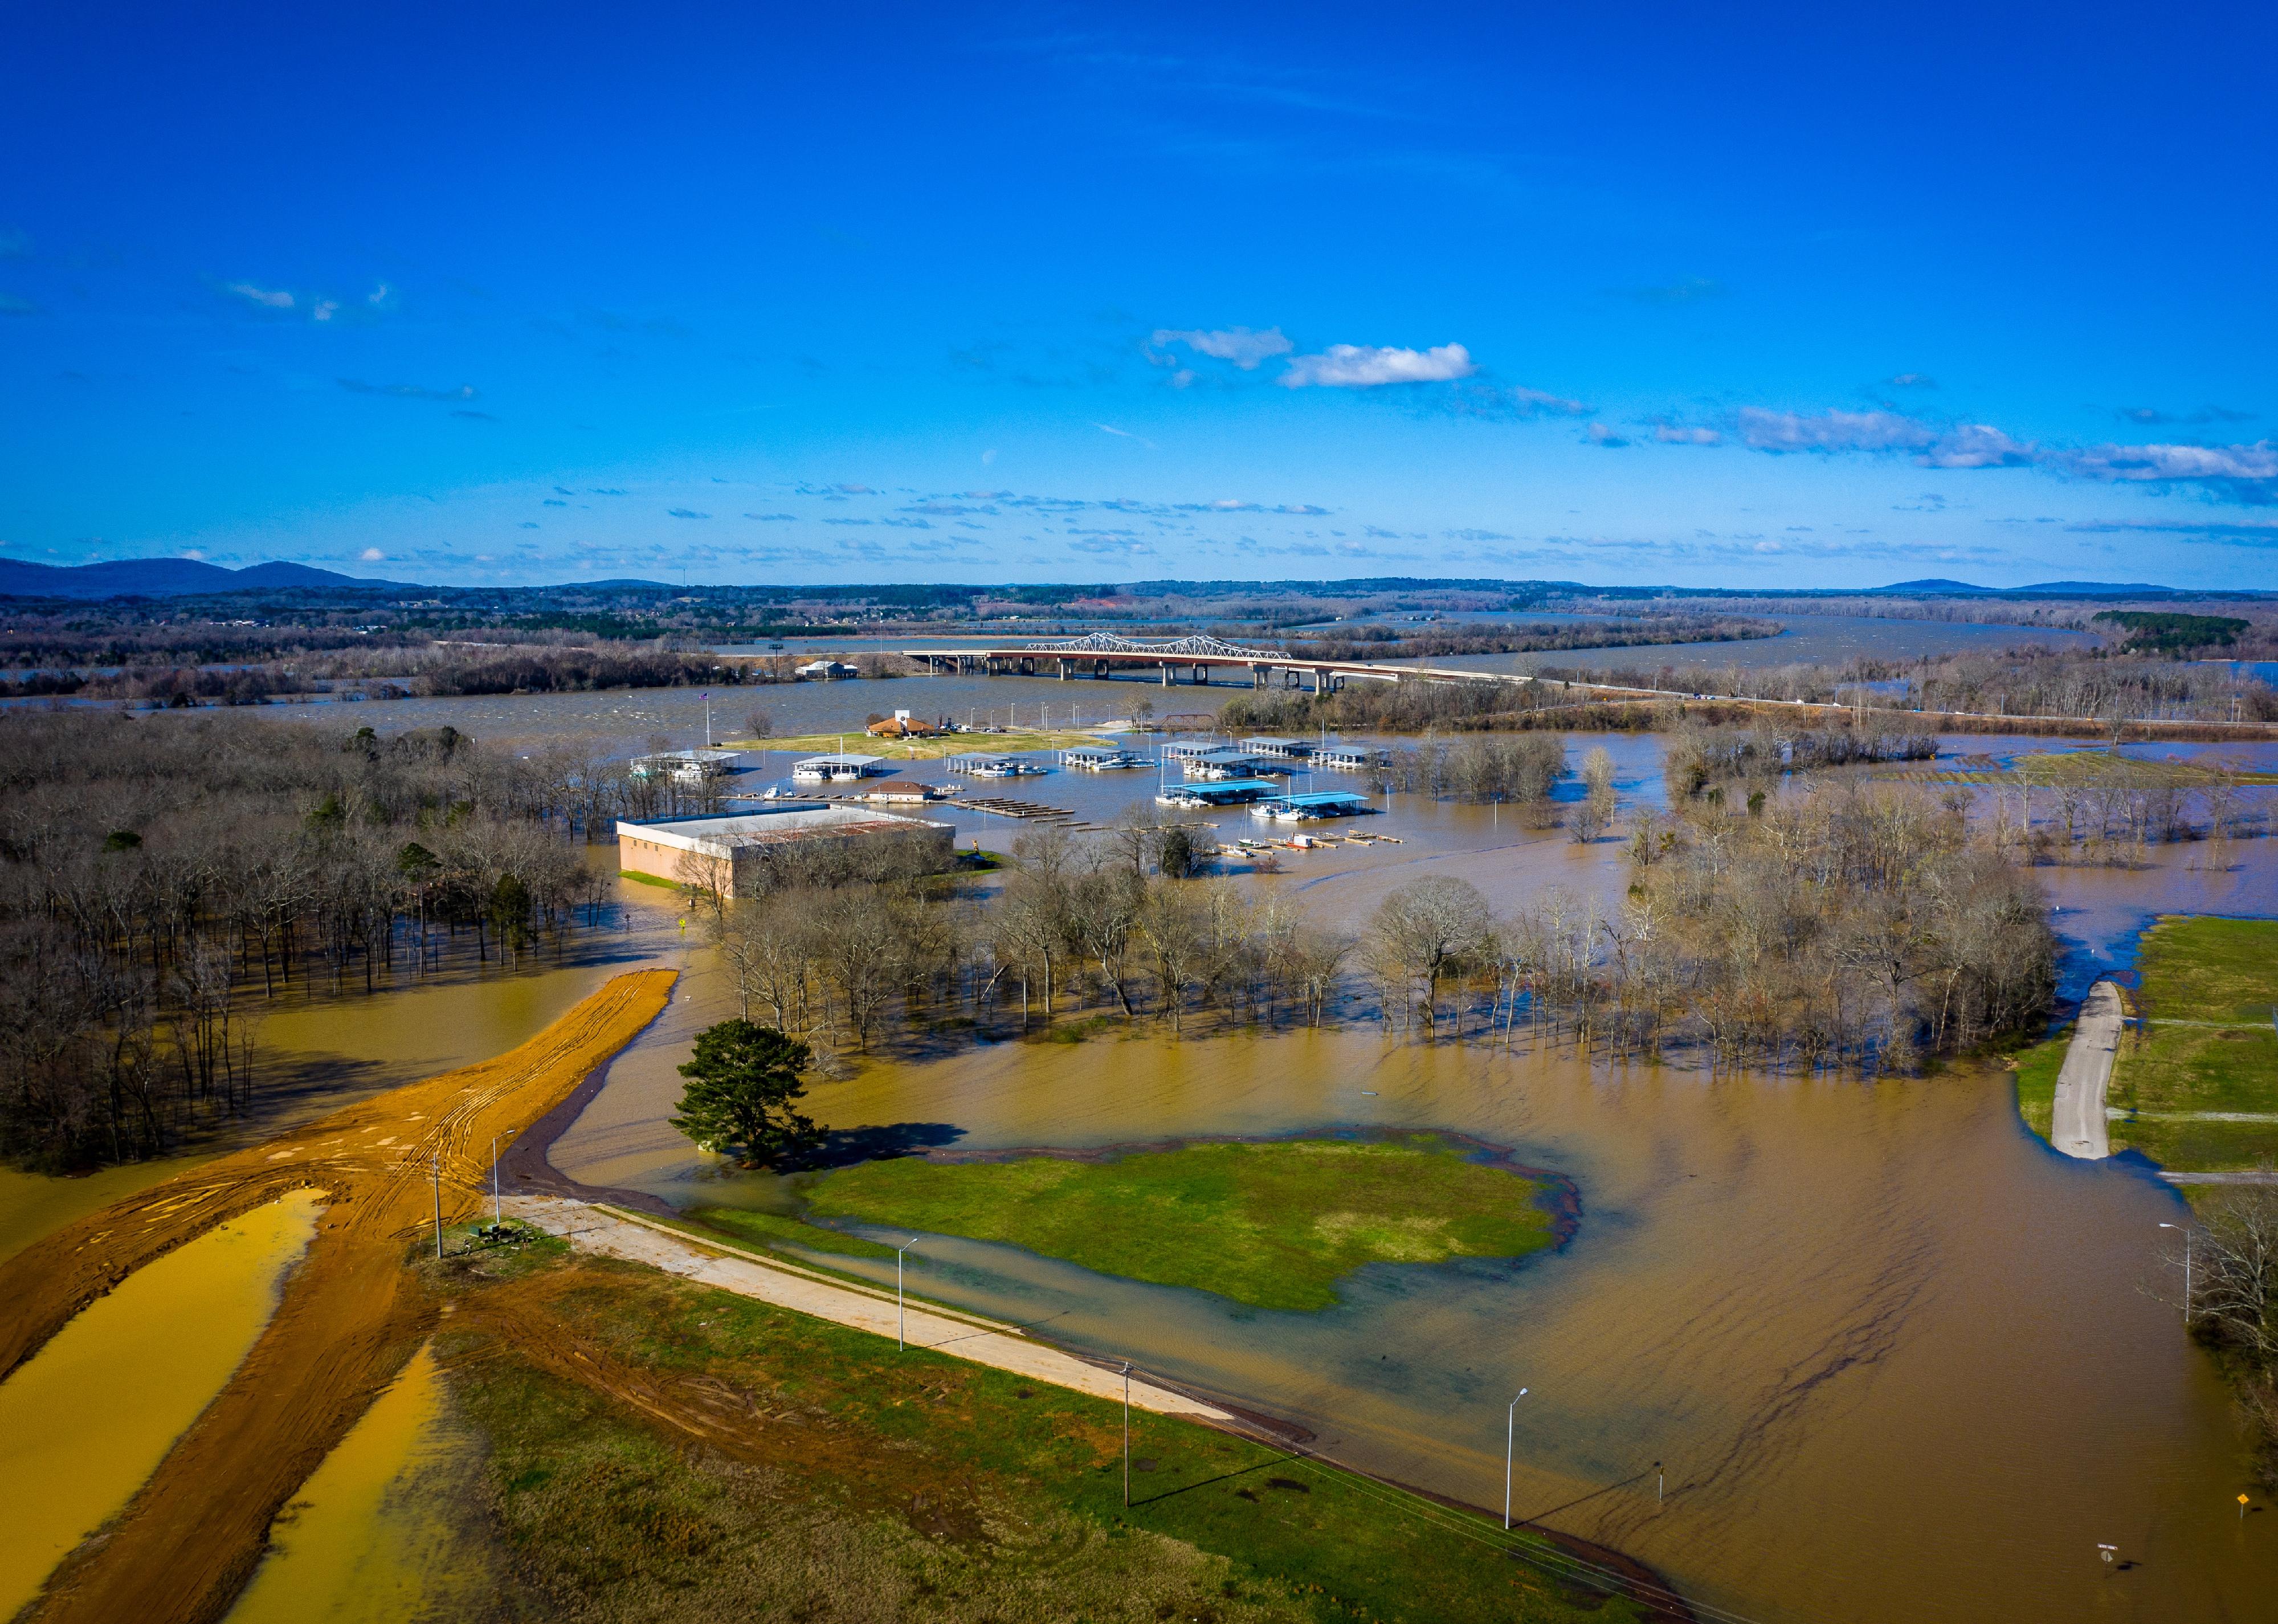 Flood waters from the Tennessee River in Huntsville, AL.